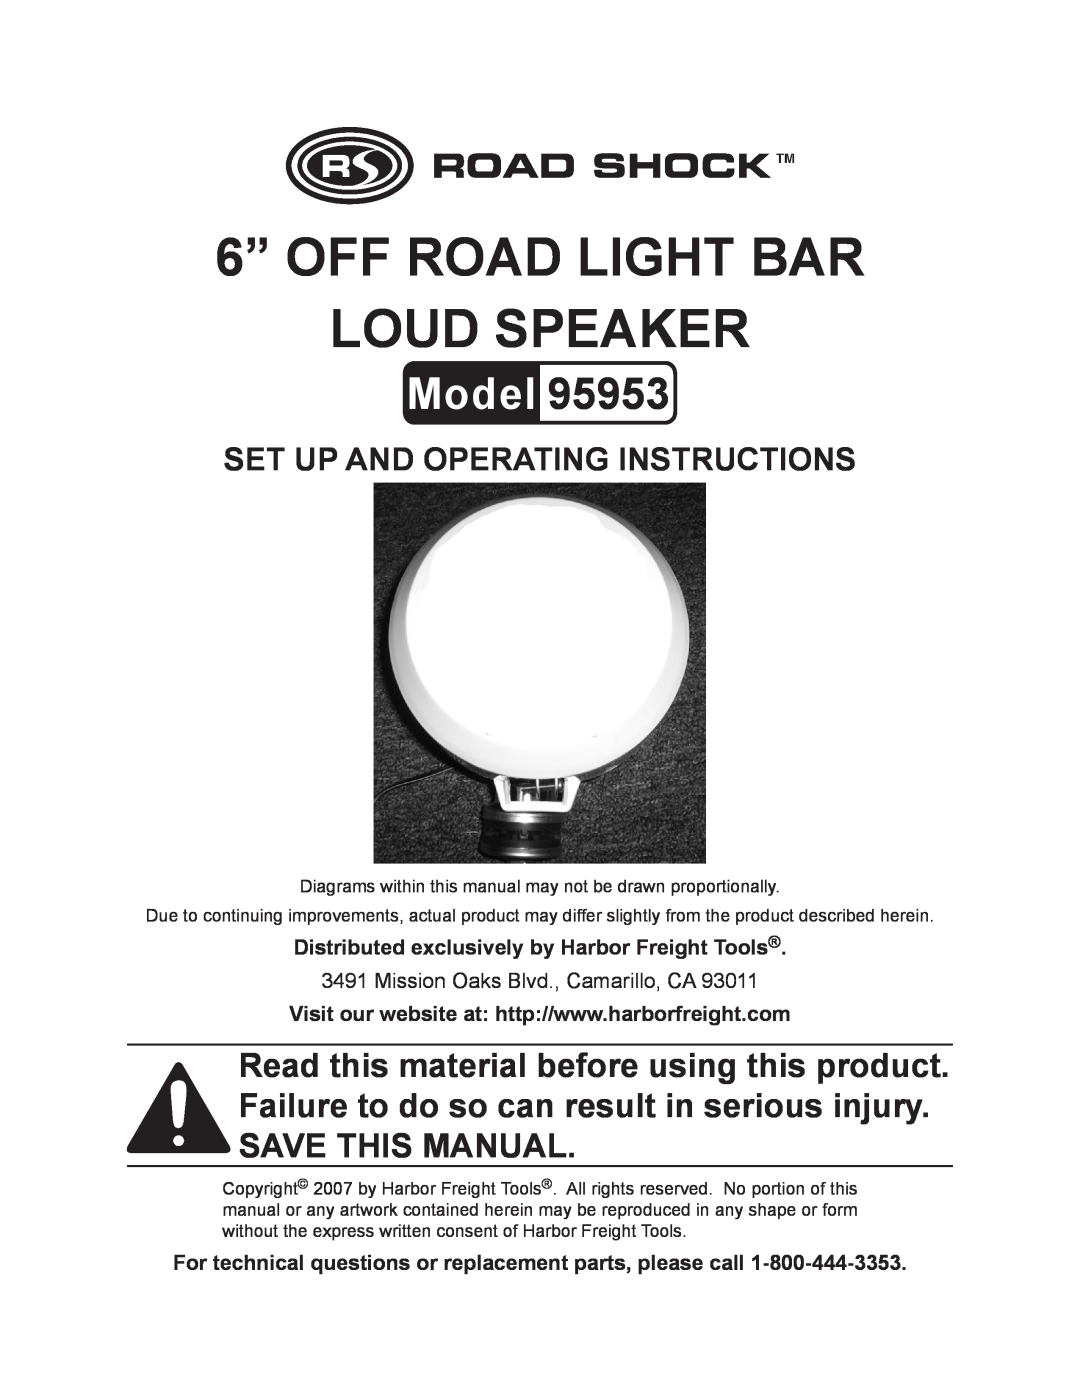 Harbor Freight Tools 95953 manual Distributed exclusively by Harbor Freight Tools, 6” OFF ROAD LIGHT BAR LOUD speaker 